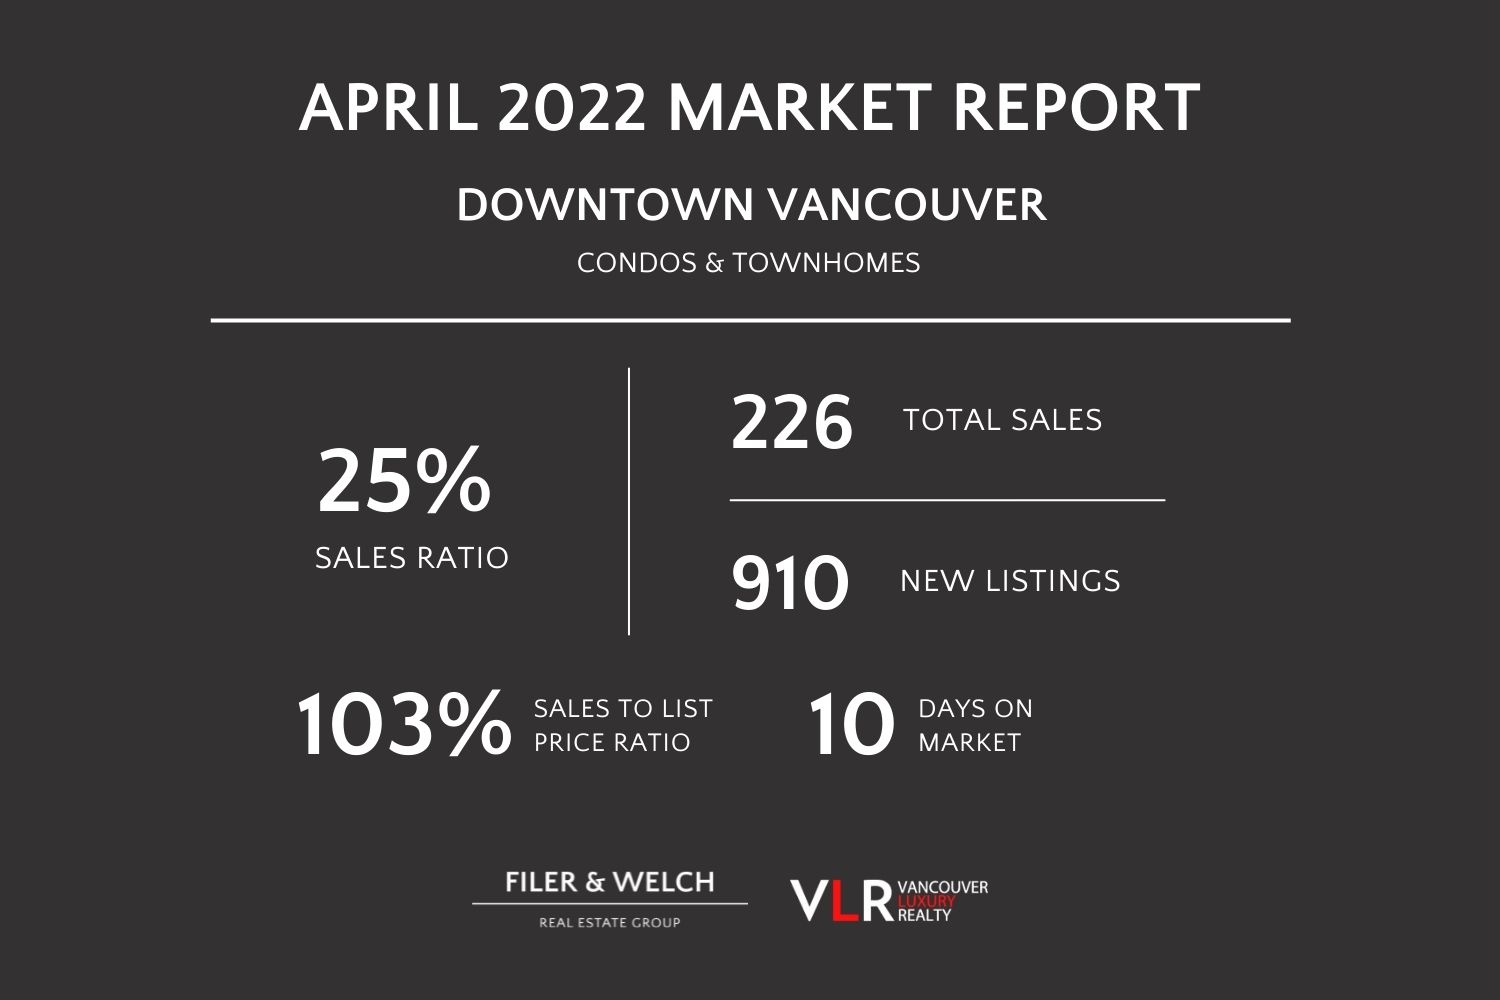 Downtown Vancouver condo and townhome sales, May 2022